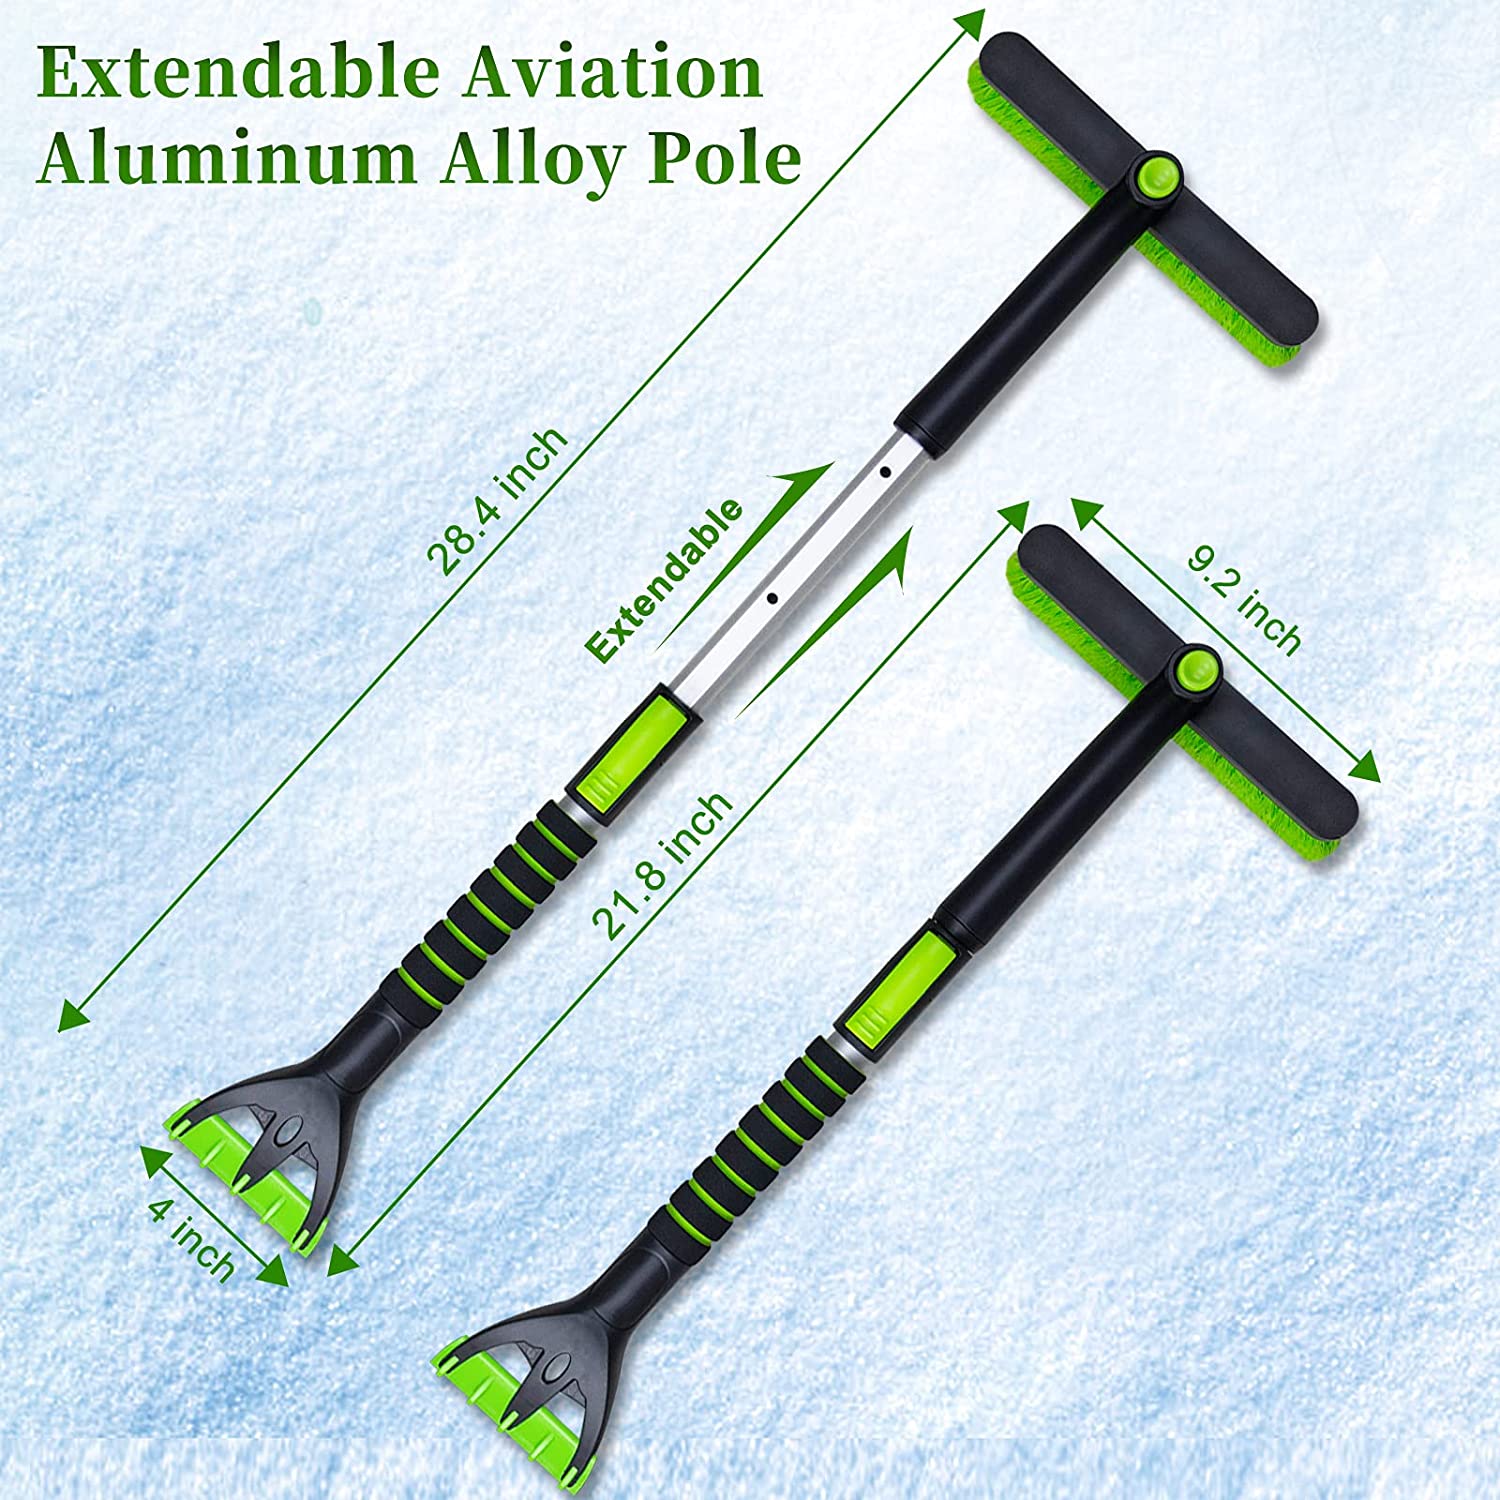 SEAAES 39 Extendable Ice Scraper and Snow Brush with Foam Grip for Car  Truck SUV Vehicle Window Green